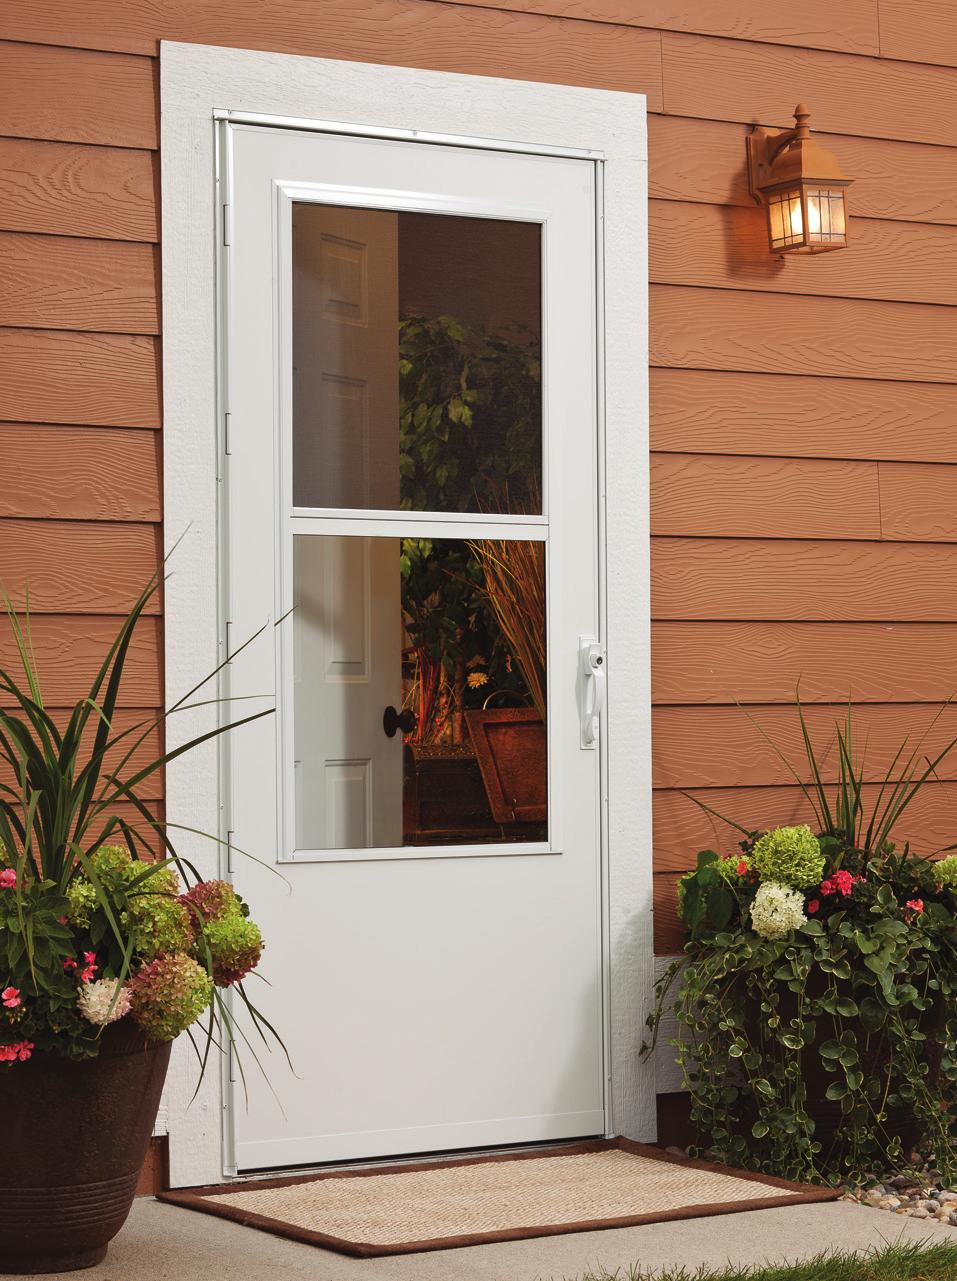 Lifestyle Retractable Screen Life-Core Standard Screen AVAILABLE COLORS AVAILABLE COLORS Brown BUYER S GUIDE PERFECT CHOICE FOR LANDLORDS FOR MORE INFORMATION SEE PAGE 16» FOR MORE INFORMATION SEE